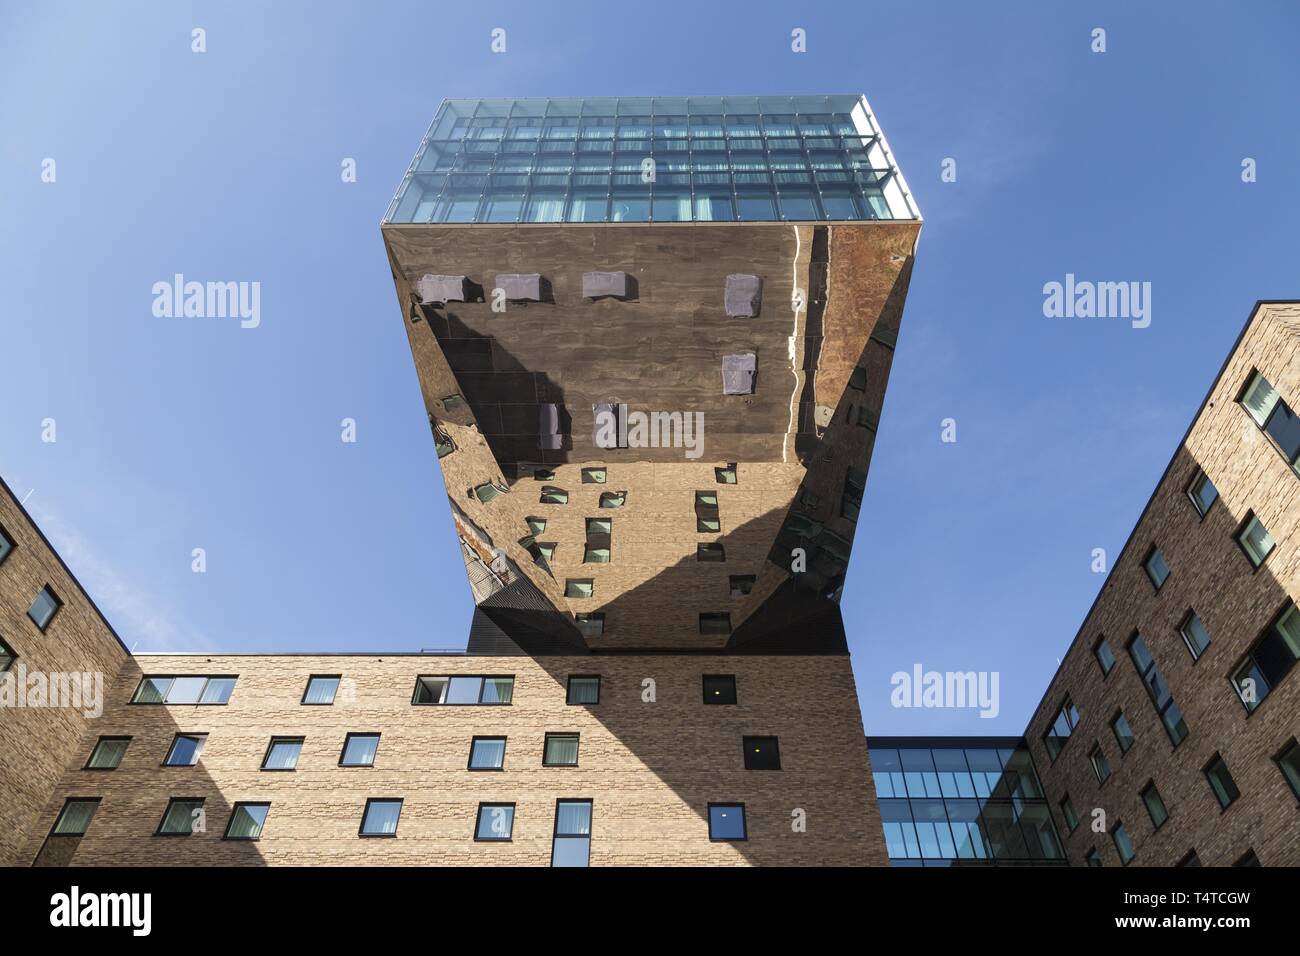 Nhow Hotel Berlin, music and lifestyle hotel with exceptional design, Stralauer Allee, former East Harbour, Berlin-Friedrichshain, Germany, Europe Stock Photo